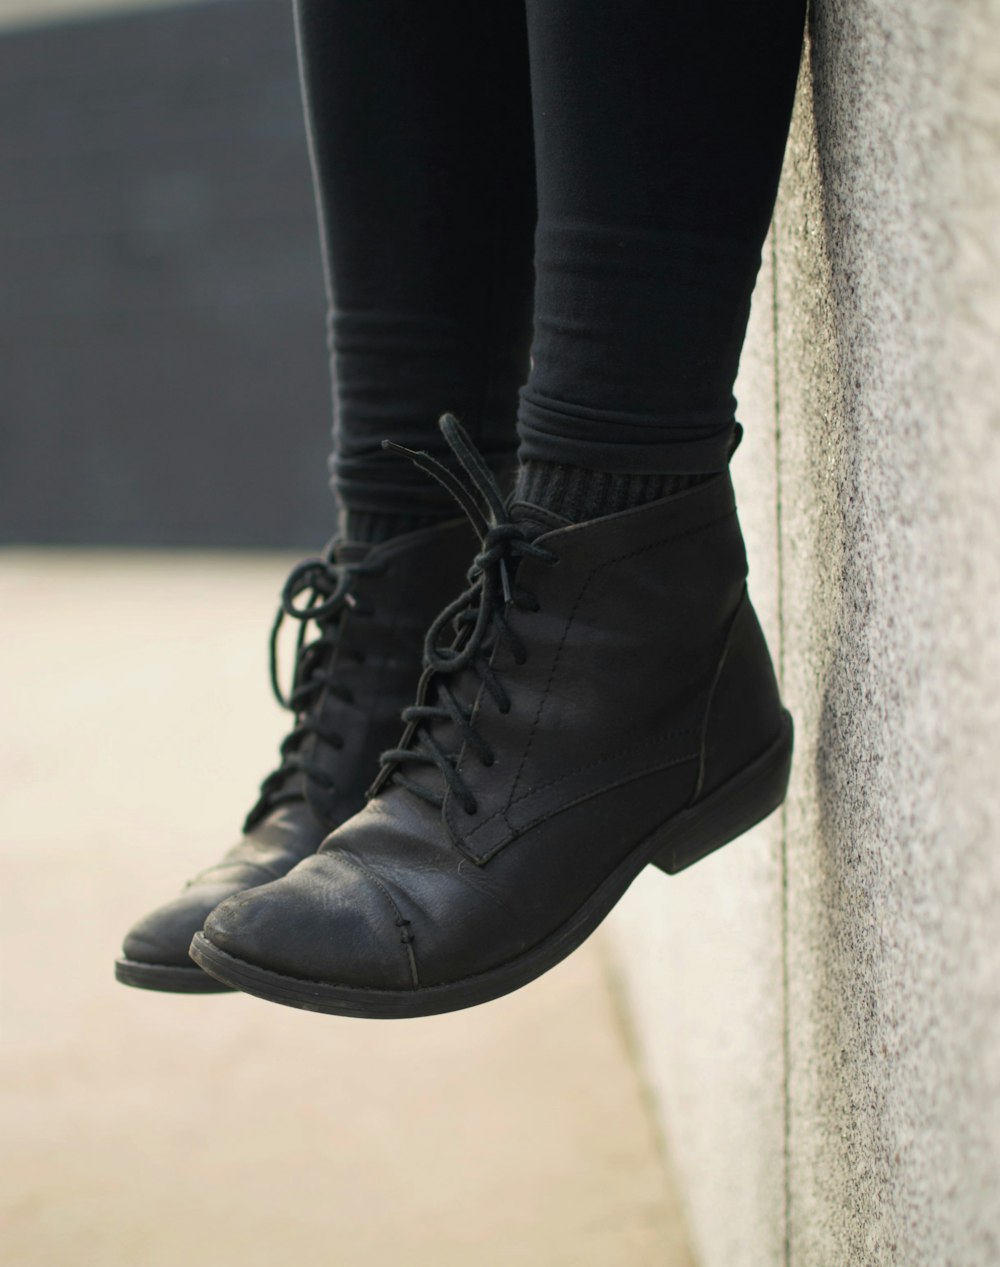 person wearing black lace-up boots